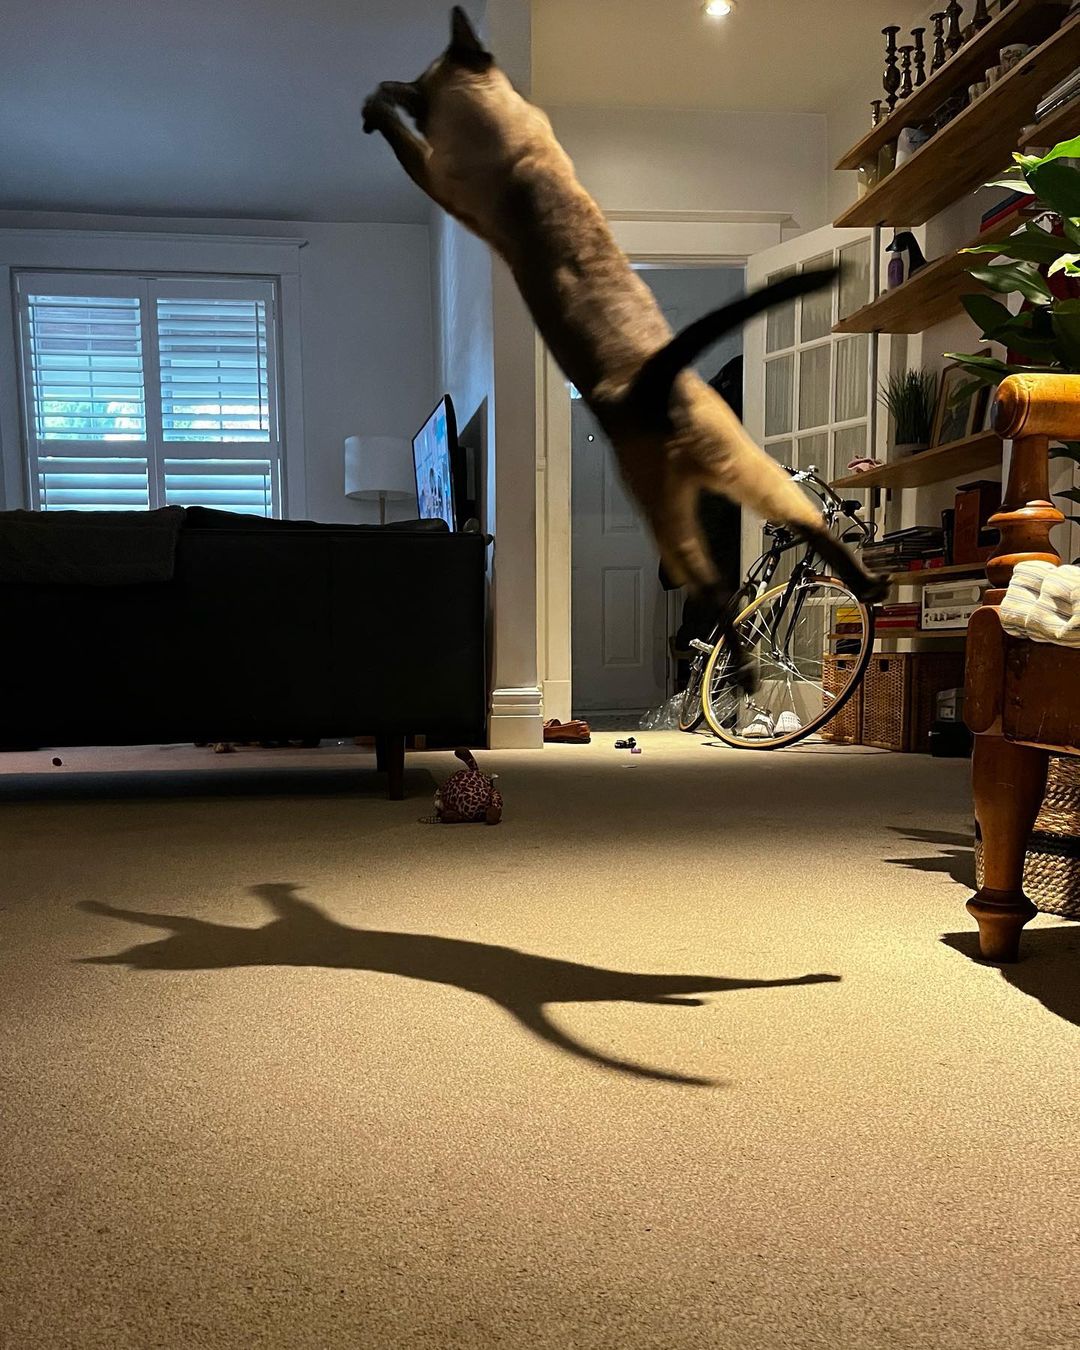 cat flying through air to catch toy, their shadow hilariously in view.